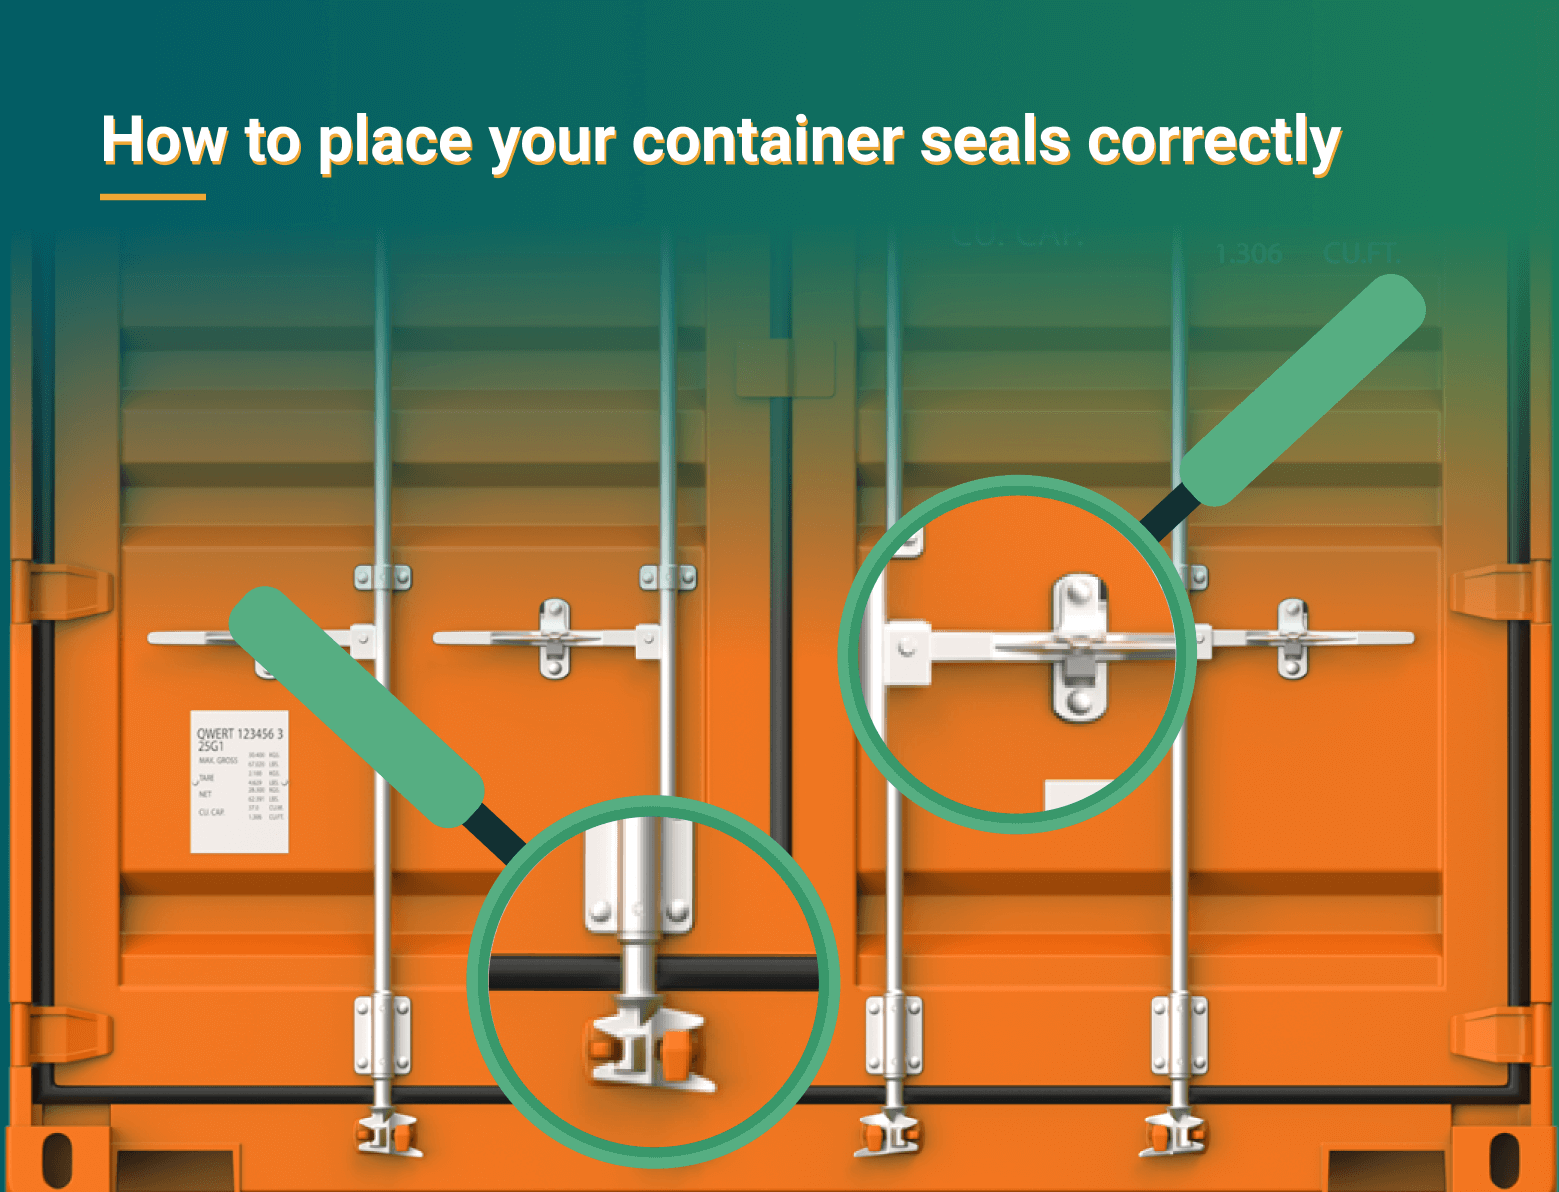 Placing container seals